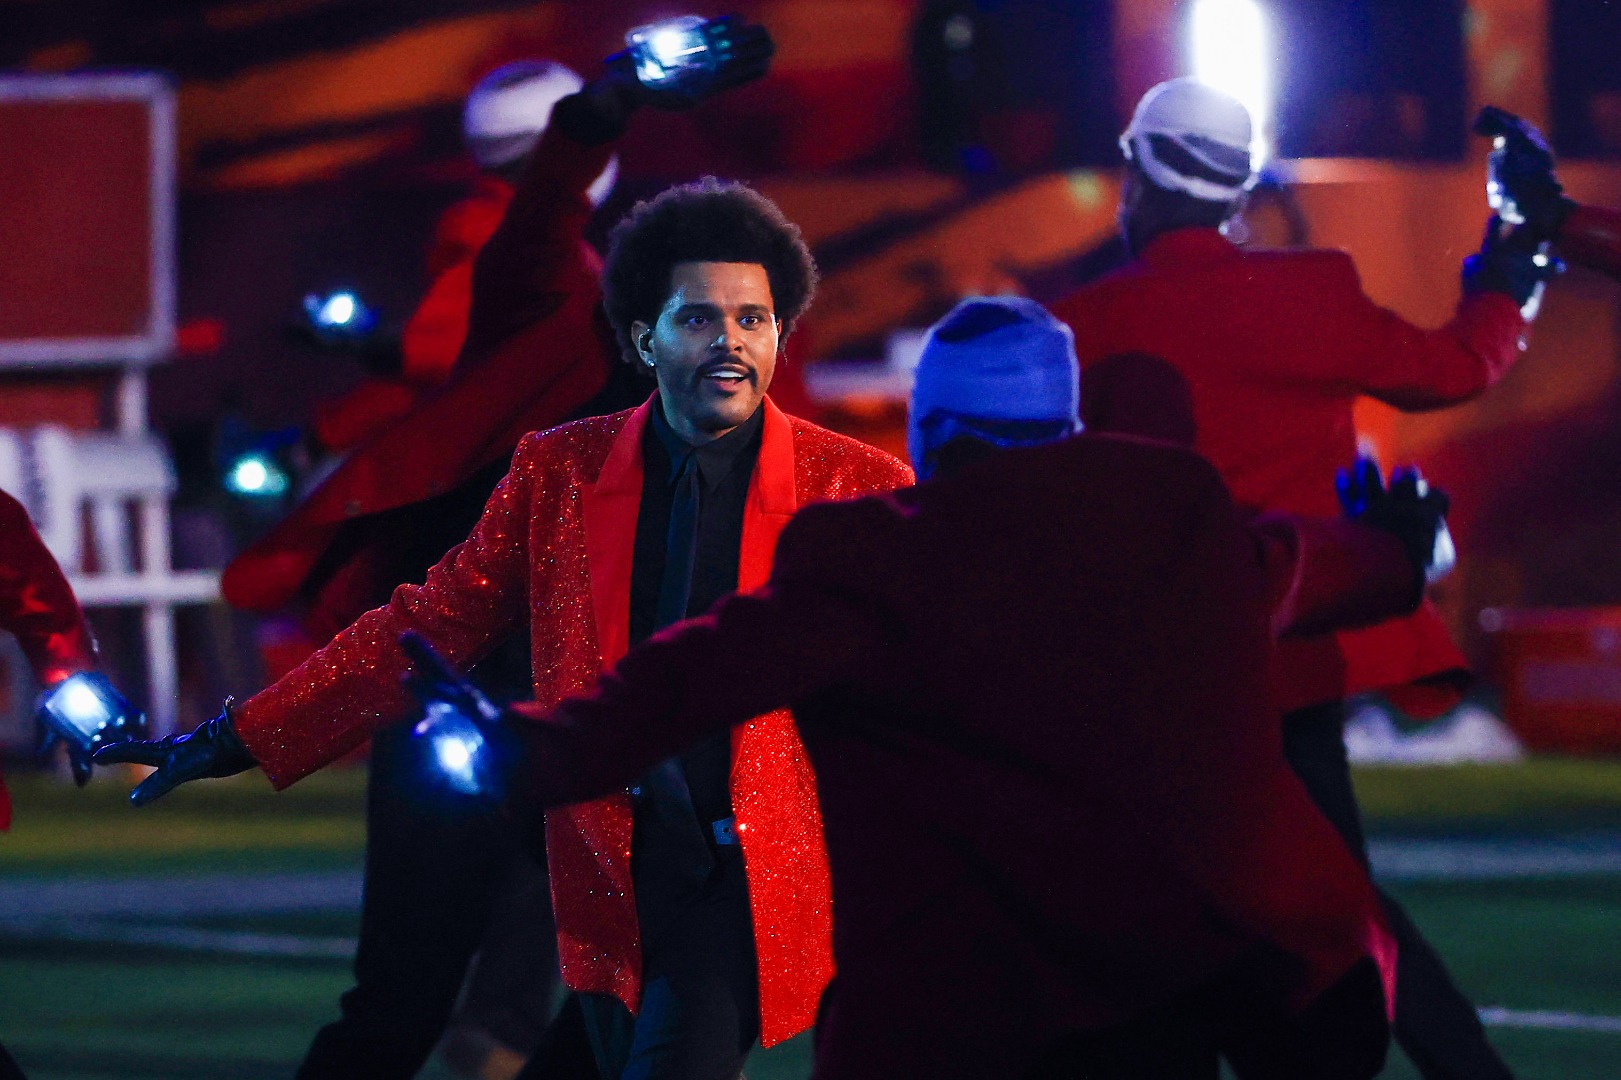 The Weeknd at Super Bowl LV Halftime Show 2021